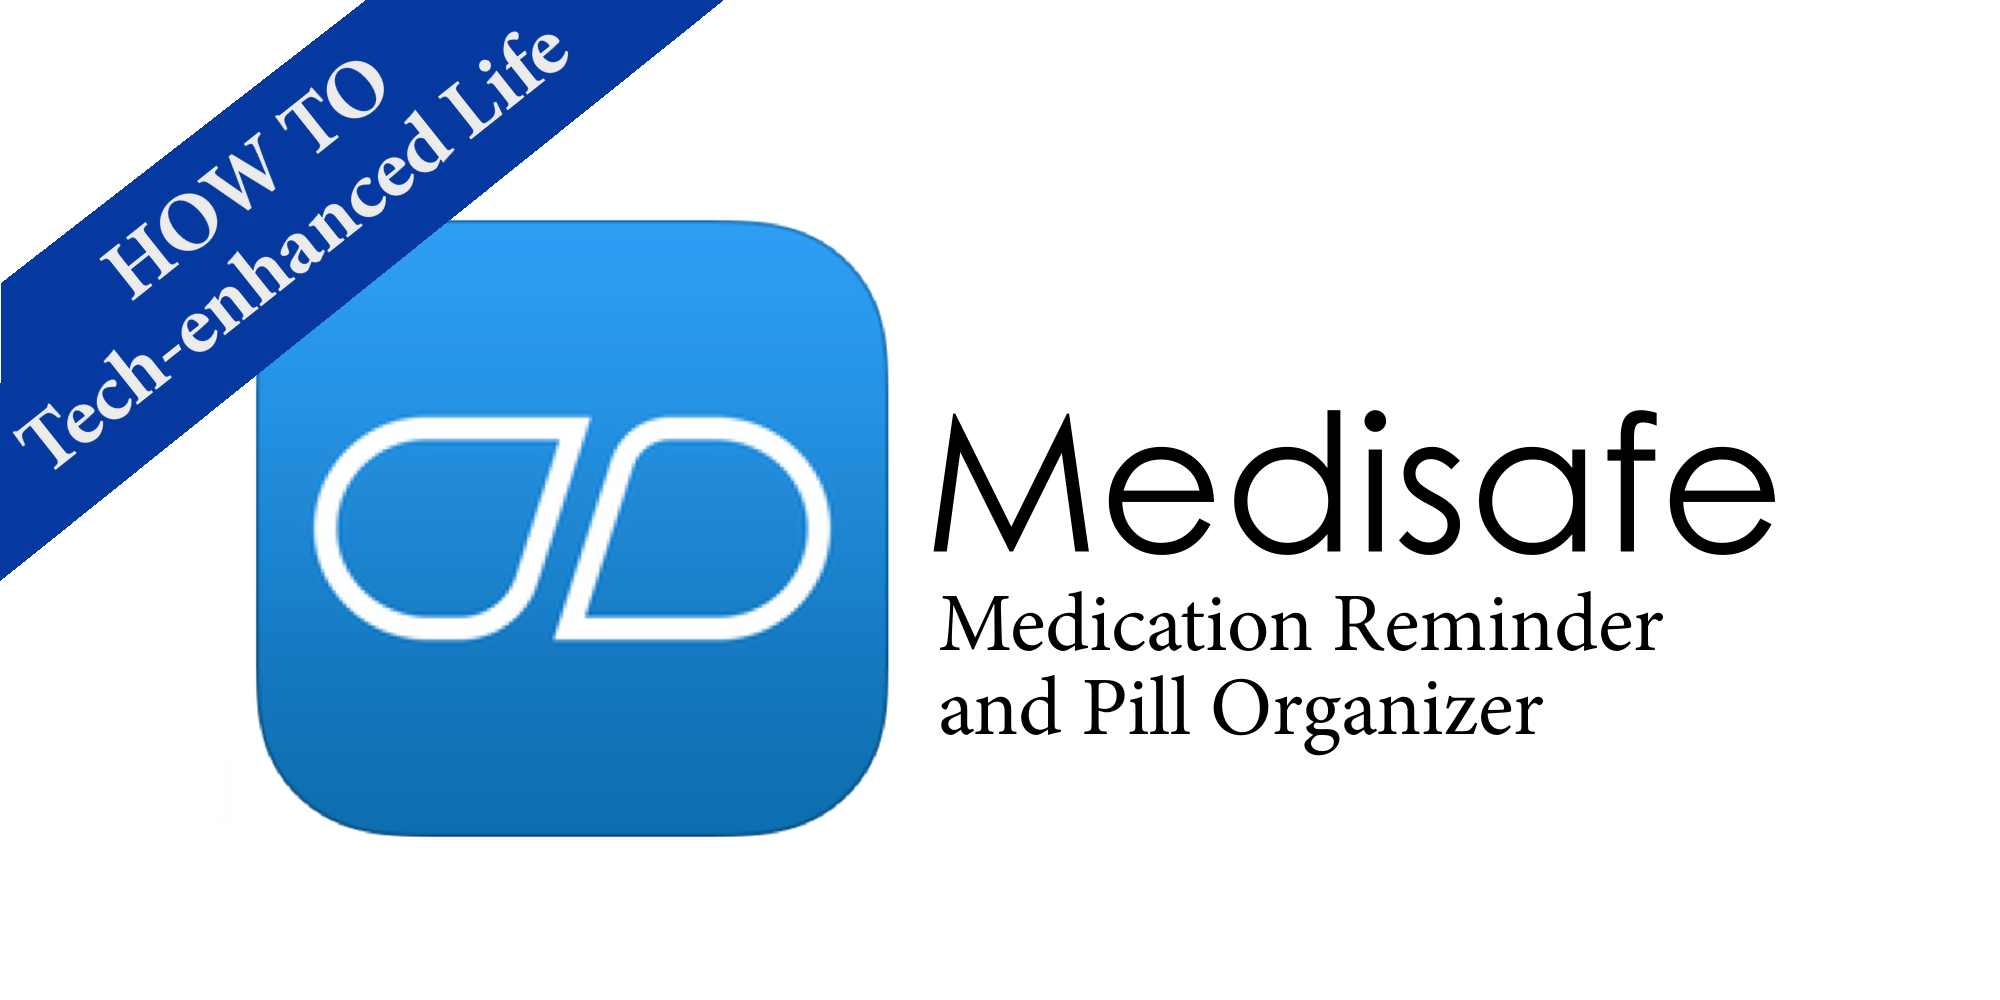 How to use Medisafe